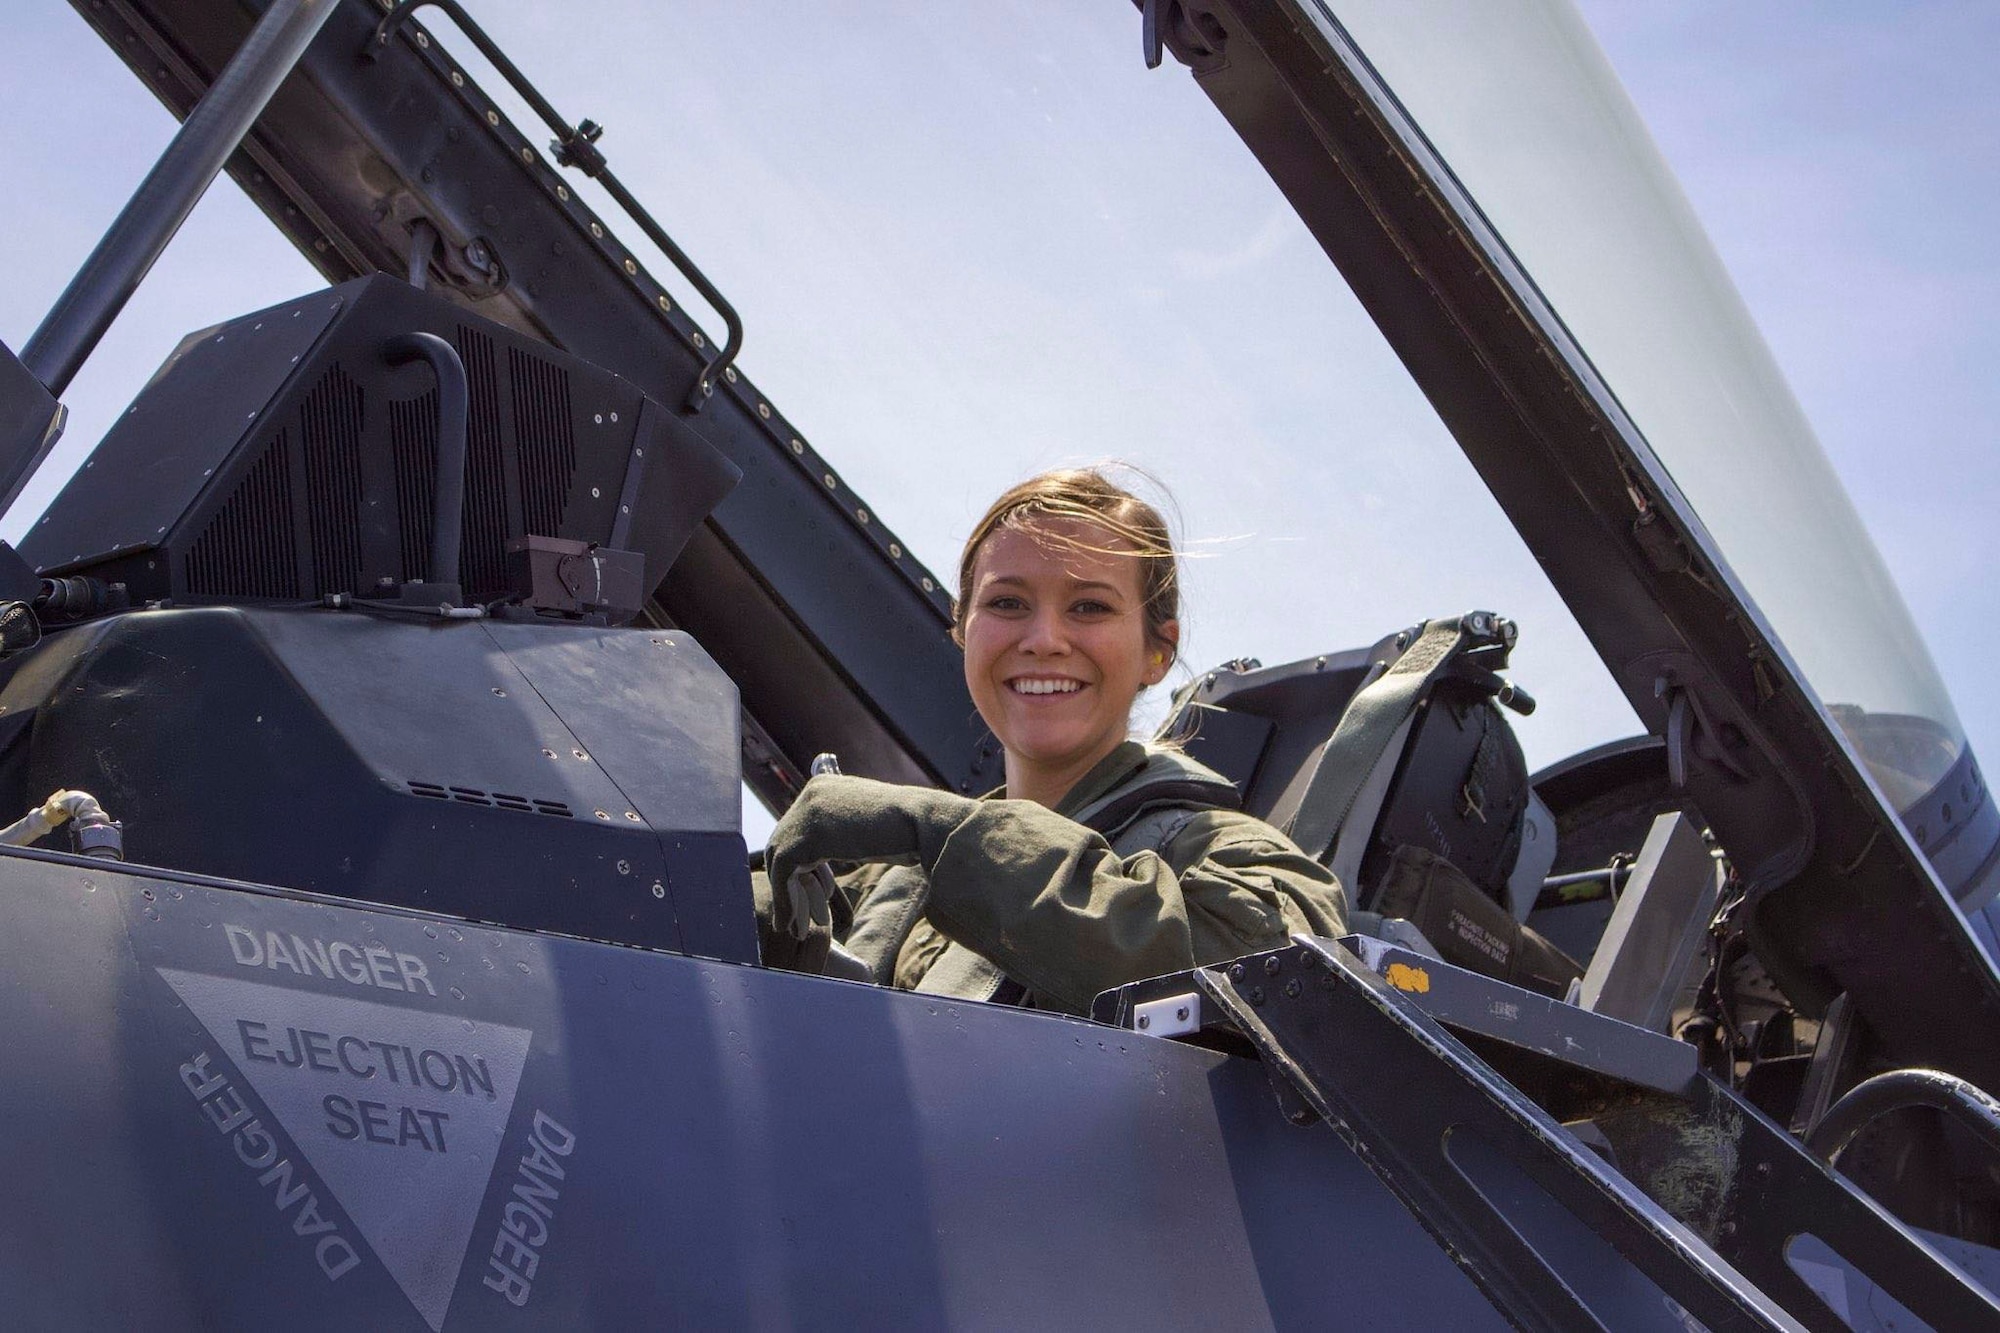 U.S. Air Force Airman Samantha Anderson, 54th Operations Support Squadron Aircrew Flight Equipment apprentice, poses for a photo before a familiarization flight in an F-16 Fighting Falcon during a temporary duty assignment with the 8th Fighter Squadron, March 29, 2019 to April 12, 2019, at Naval Air Station Joint Reserve Base New Orleans, La. Anderson said she experienced the gravitational pull of six times her body weight during her FAM flight. (Courtesy photo)